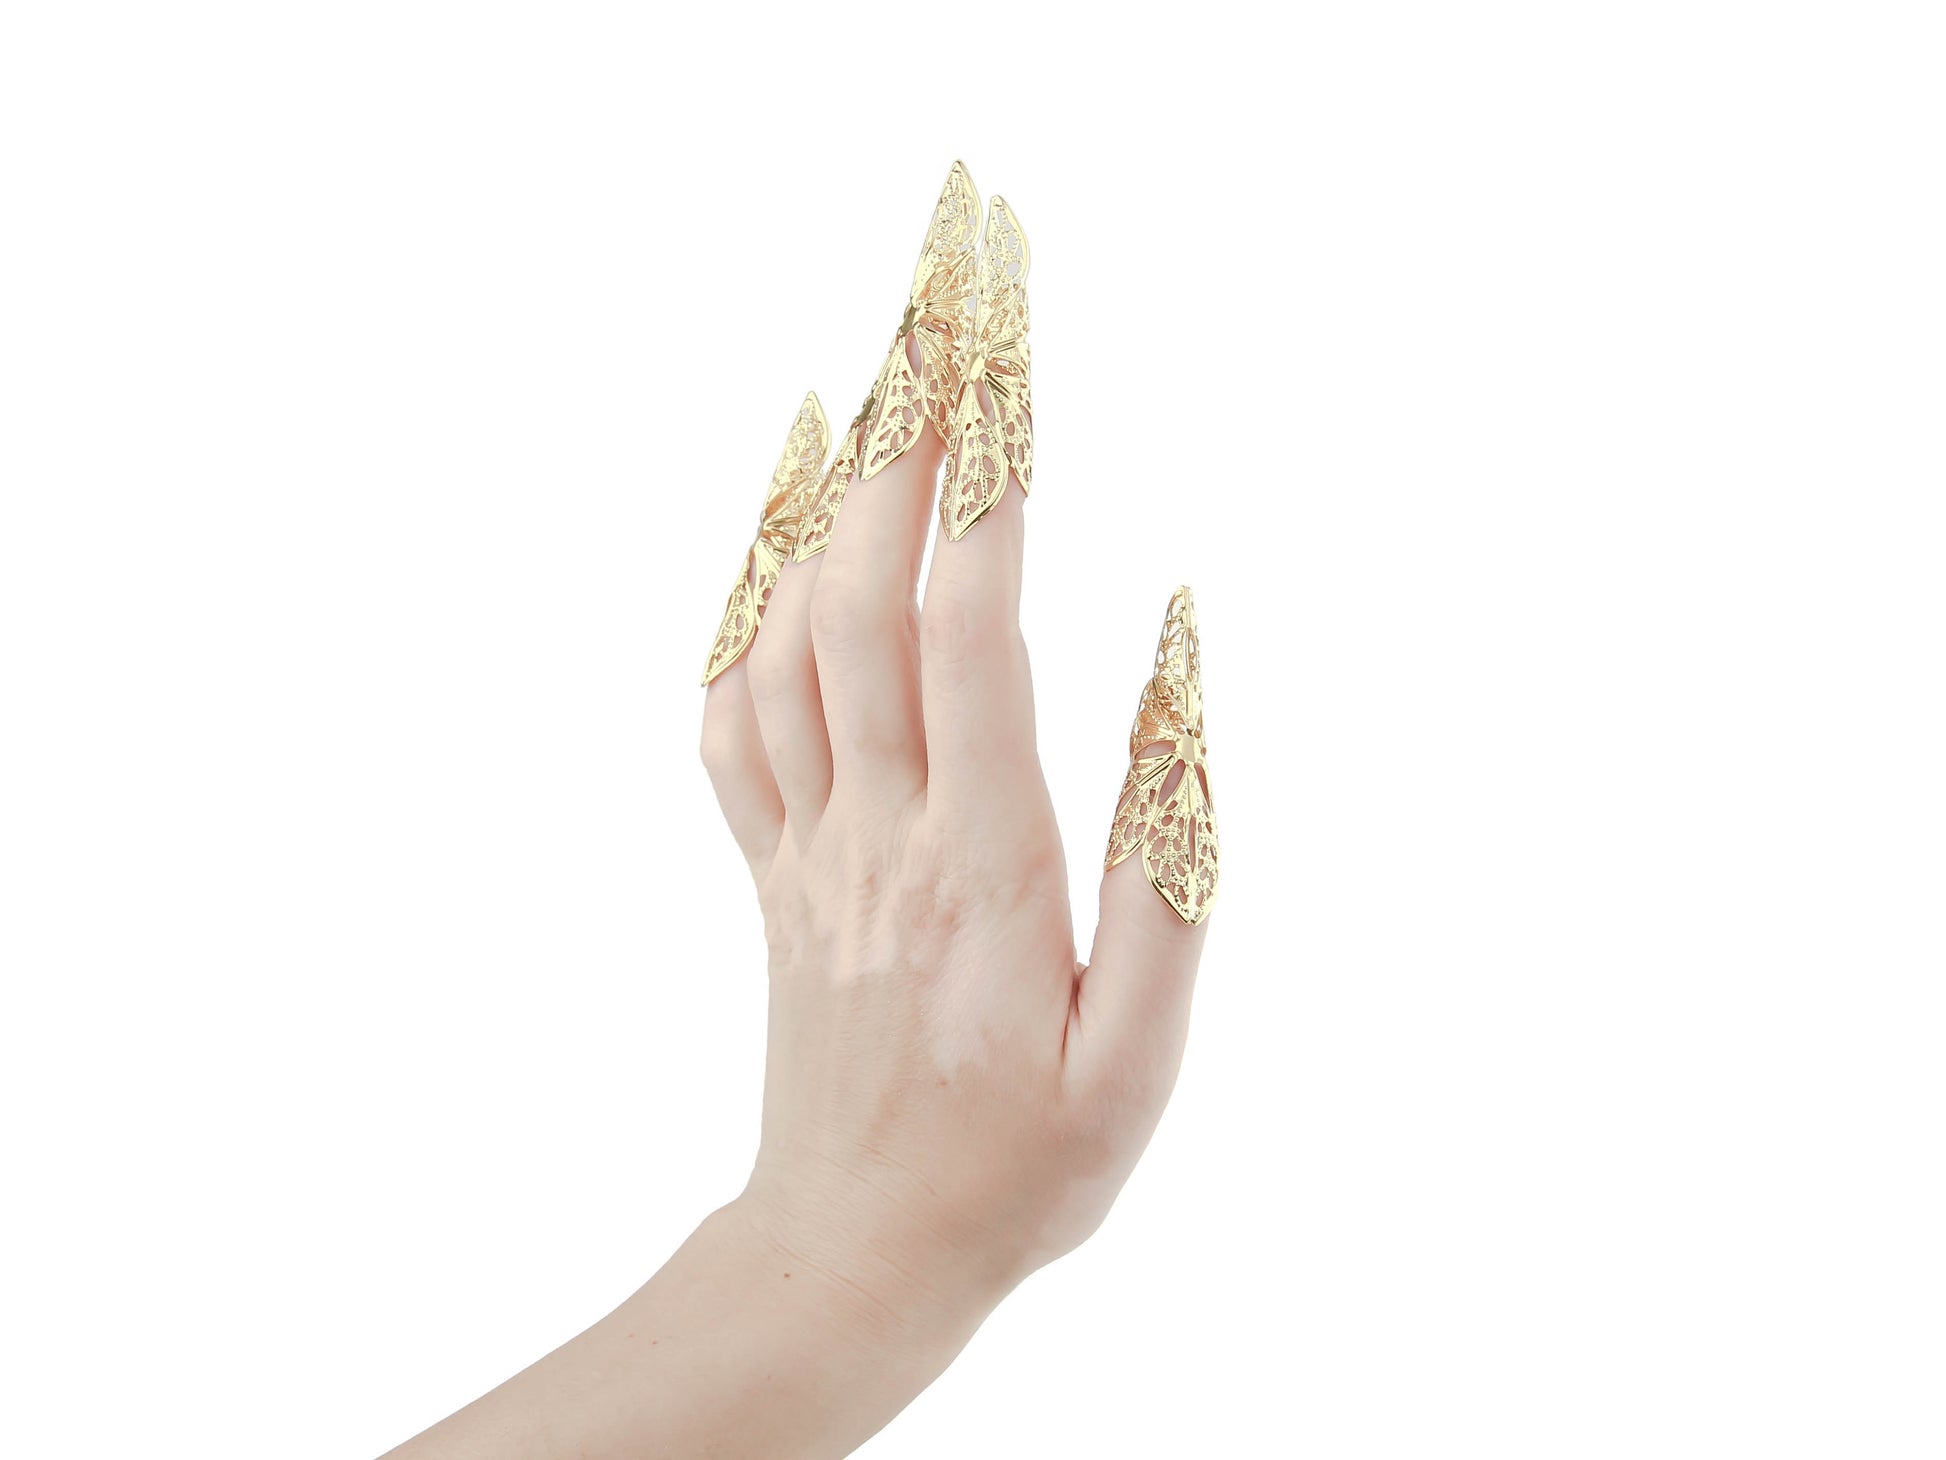 Elegant long nail claws by Myril Jewels exude a neo-goth charm, perfect for those with a penchant for dark, avant-garde accessories. Ideal for Halloween, these gold claw-like pieces are also suited for punk and whimsigoth aesthetics, making a bold statement at raves and festivals, or as a striking gift for the goth girlfriend.